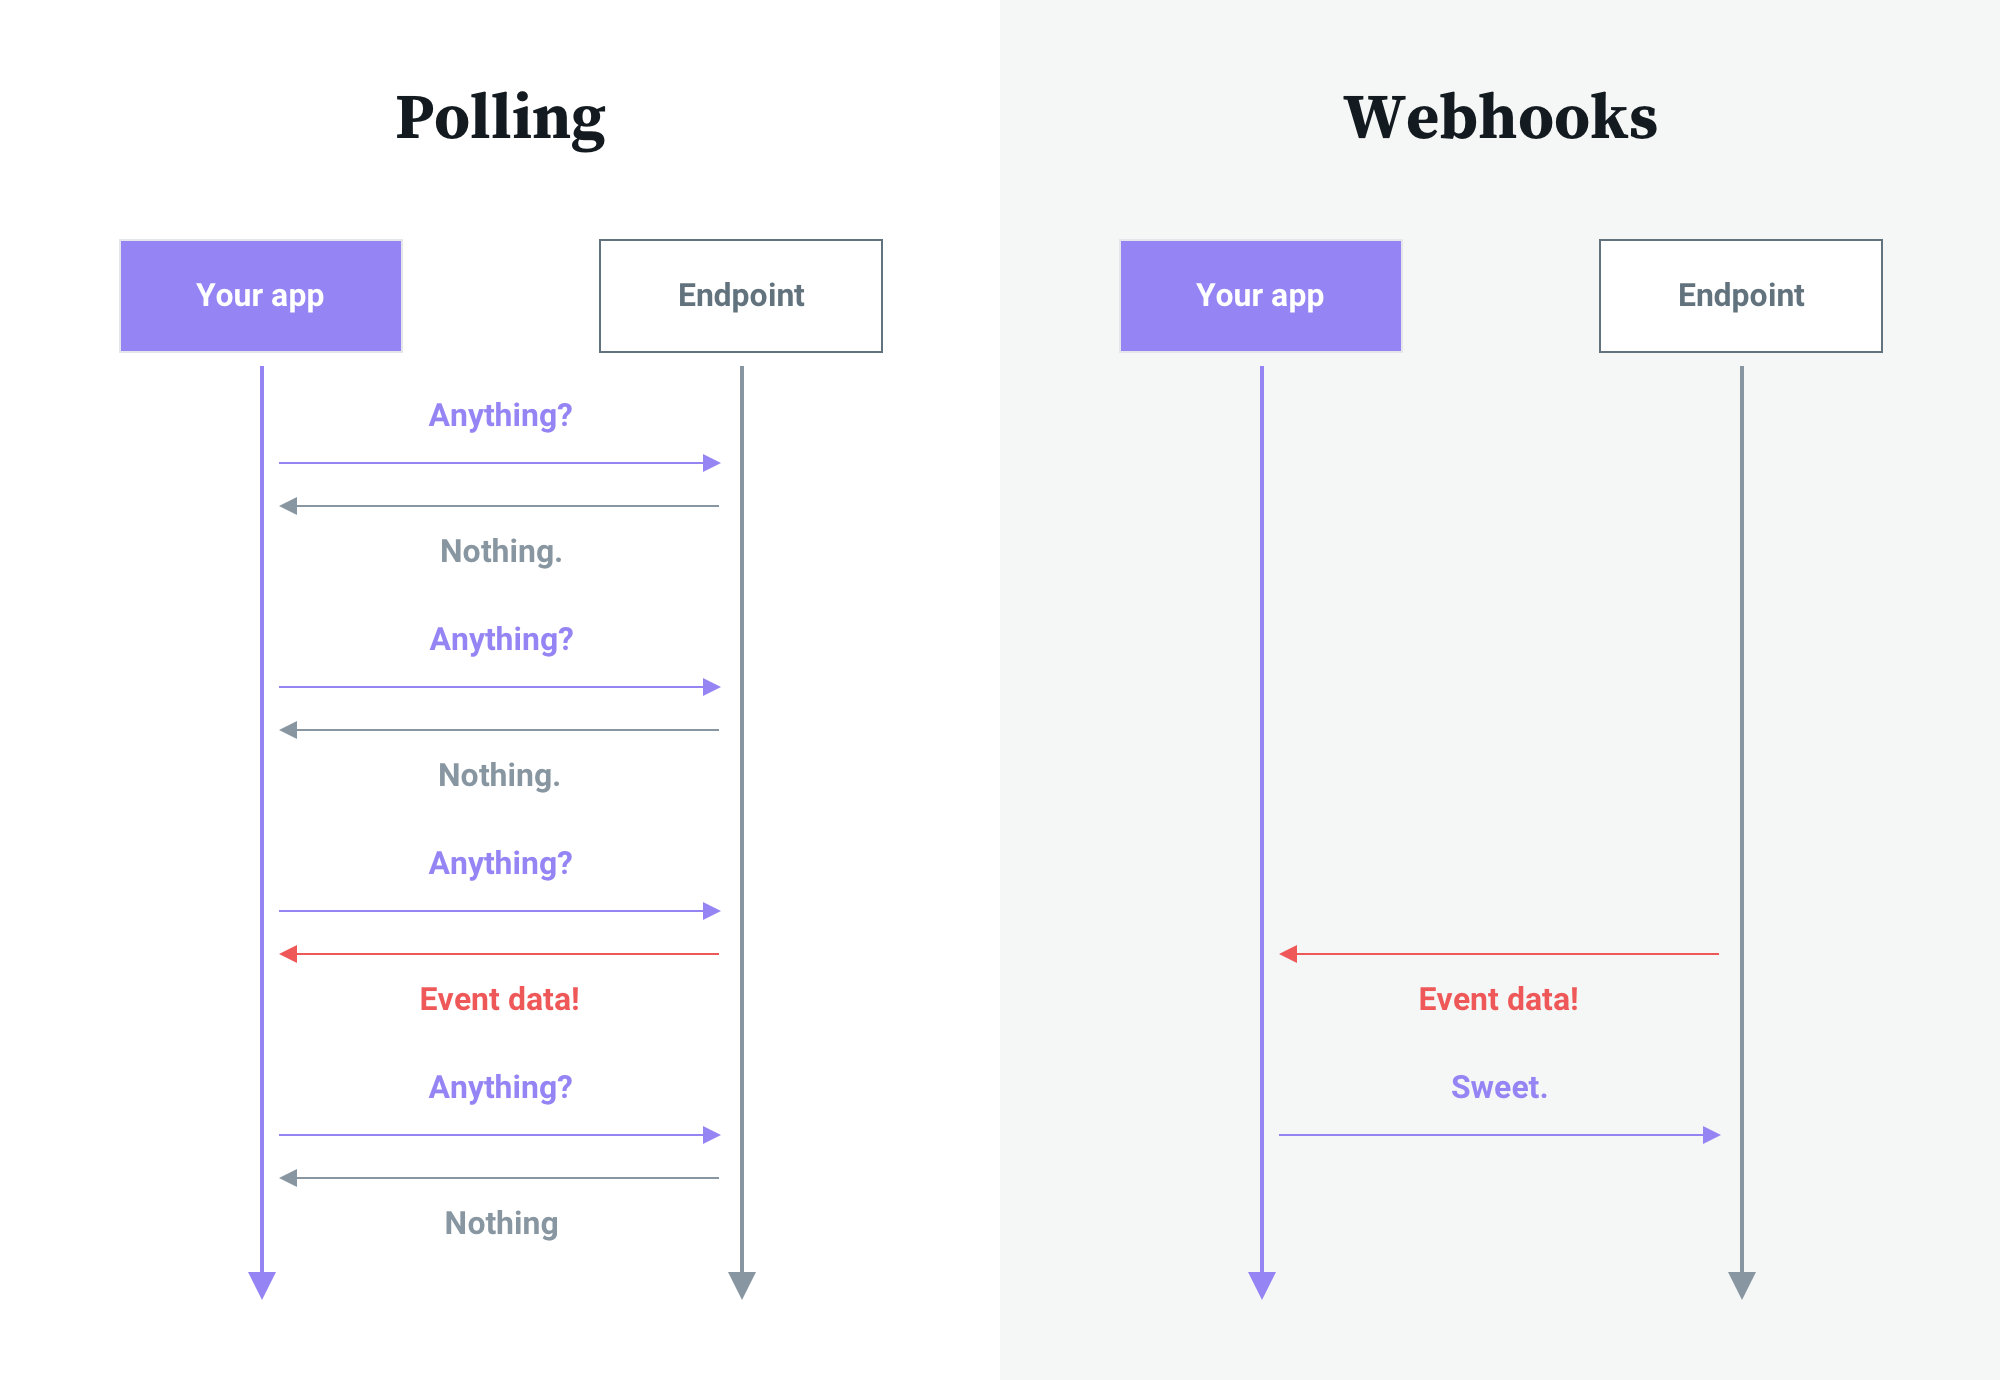 Diagrams comparing polling vs webhooks